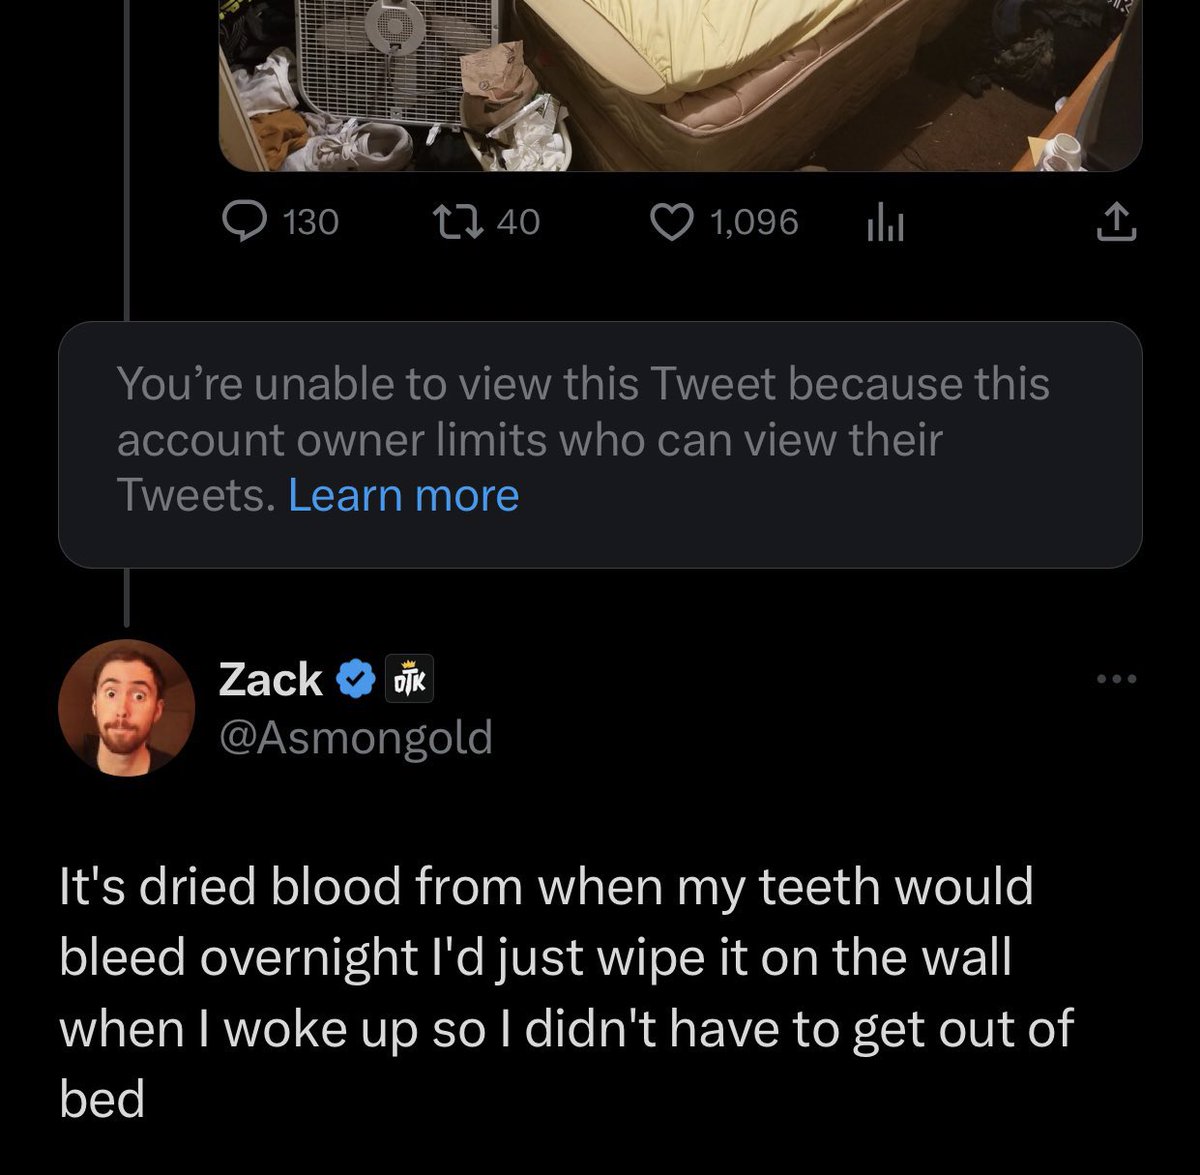 Reminder that this dude is famous for smearing tooth blood on his bedroom wall